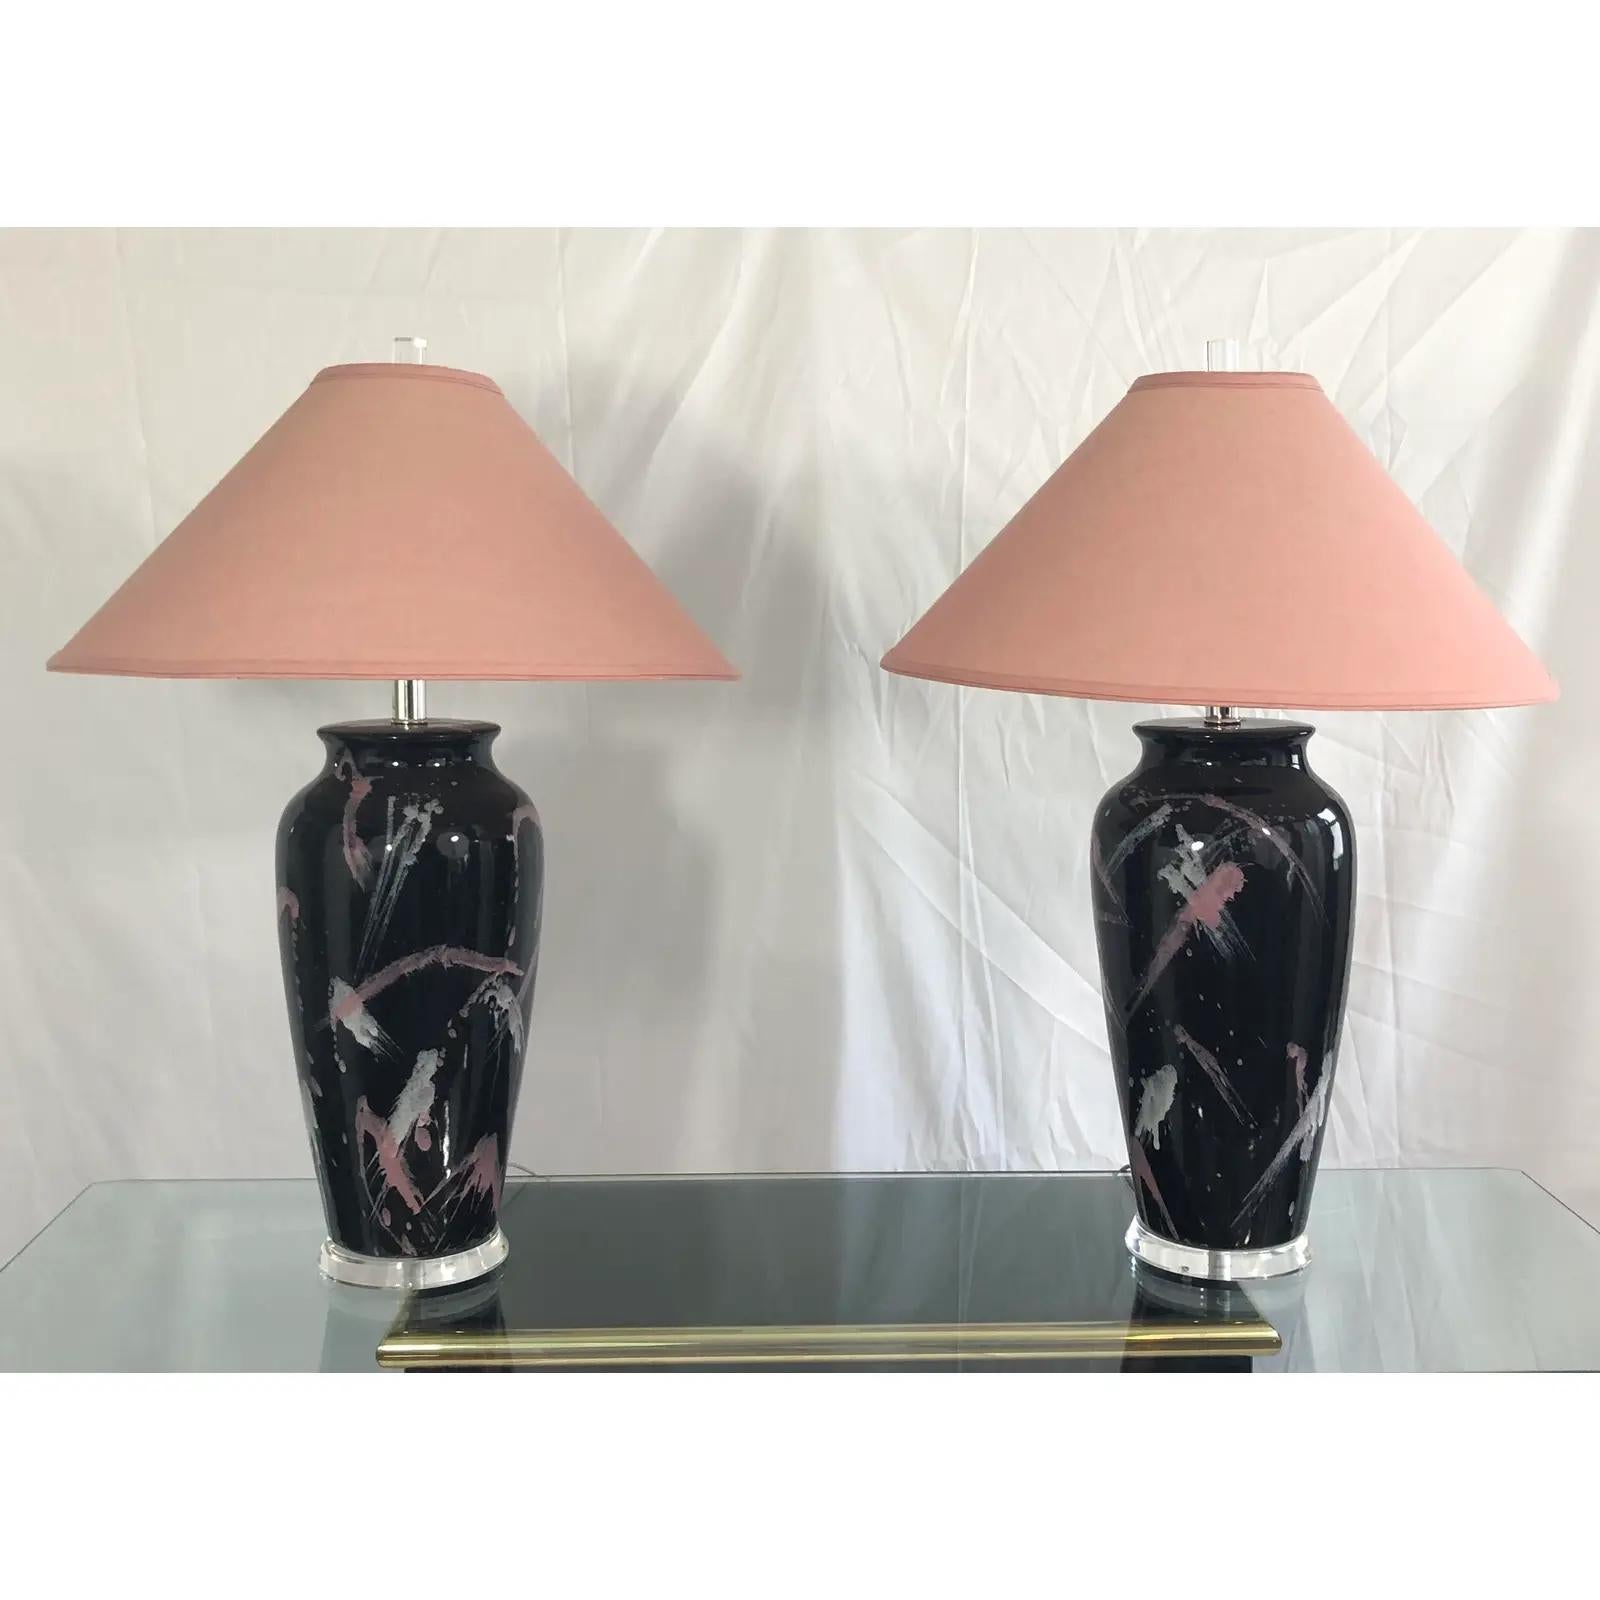 Pair of vintage, pink and white graphic splatter glaze over black finish table lamps in the style of Jackson Pollock. Height to top of socket is approx. 20